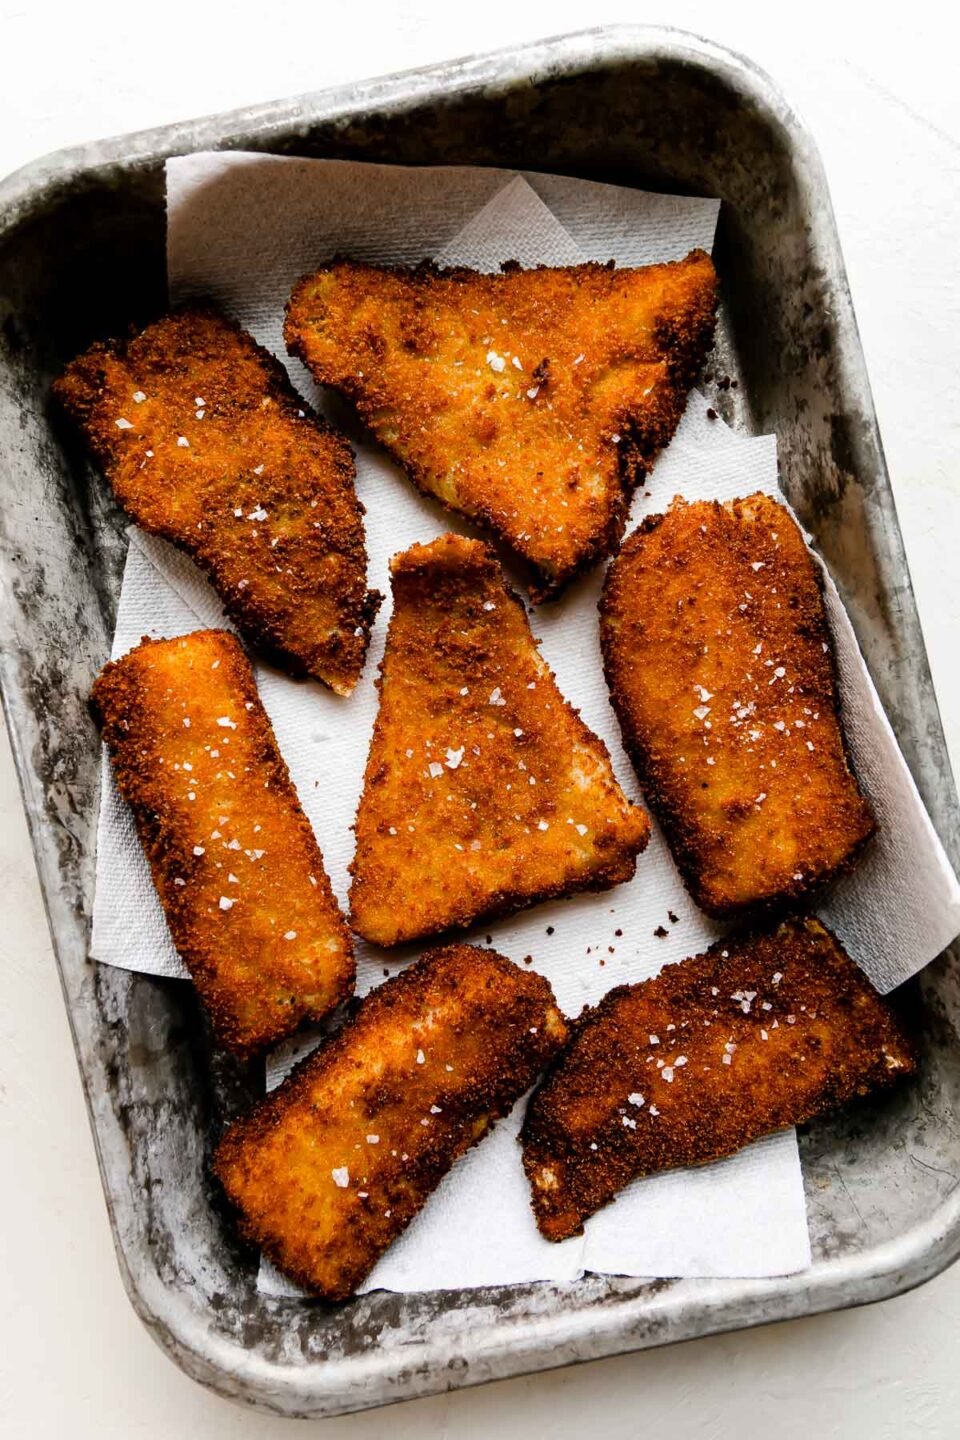 Seven pieces of fried cod rest atop a paper towel lined metal baking sheet. The baking sheet pan sits atop a creamy white textured surface and the fish has been garnished with flaky sea salt.